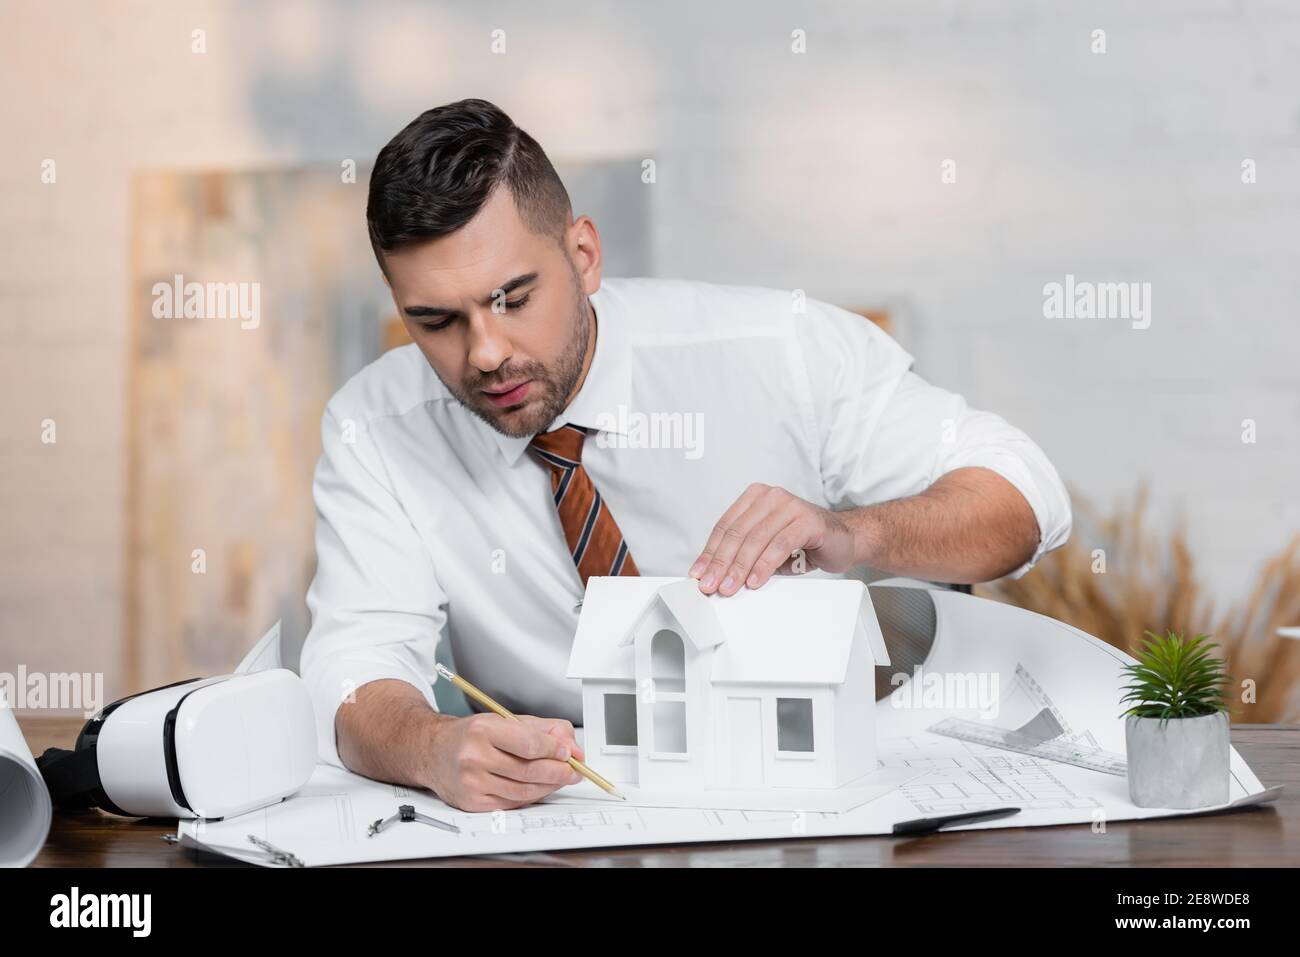 concentrated architect drawing on blueprint near house model Stock Photo